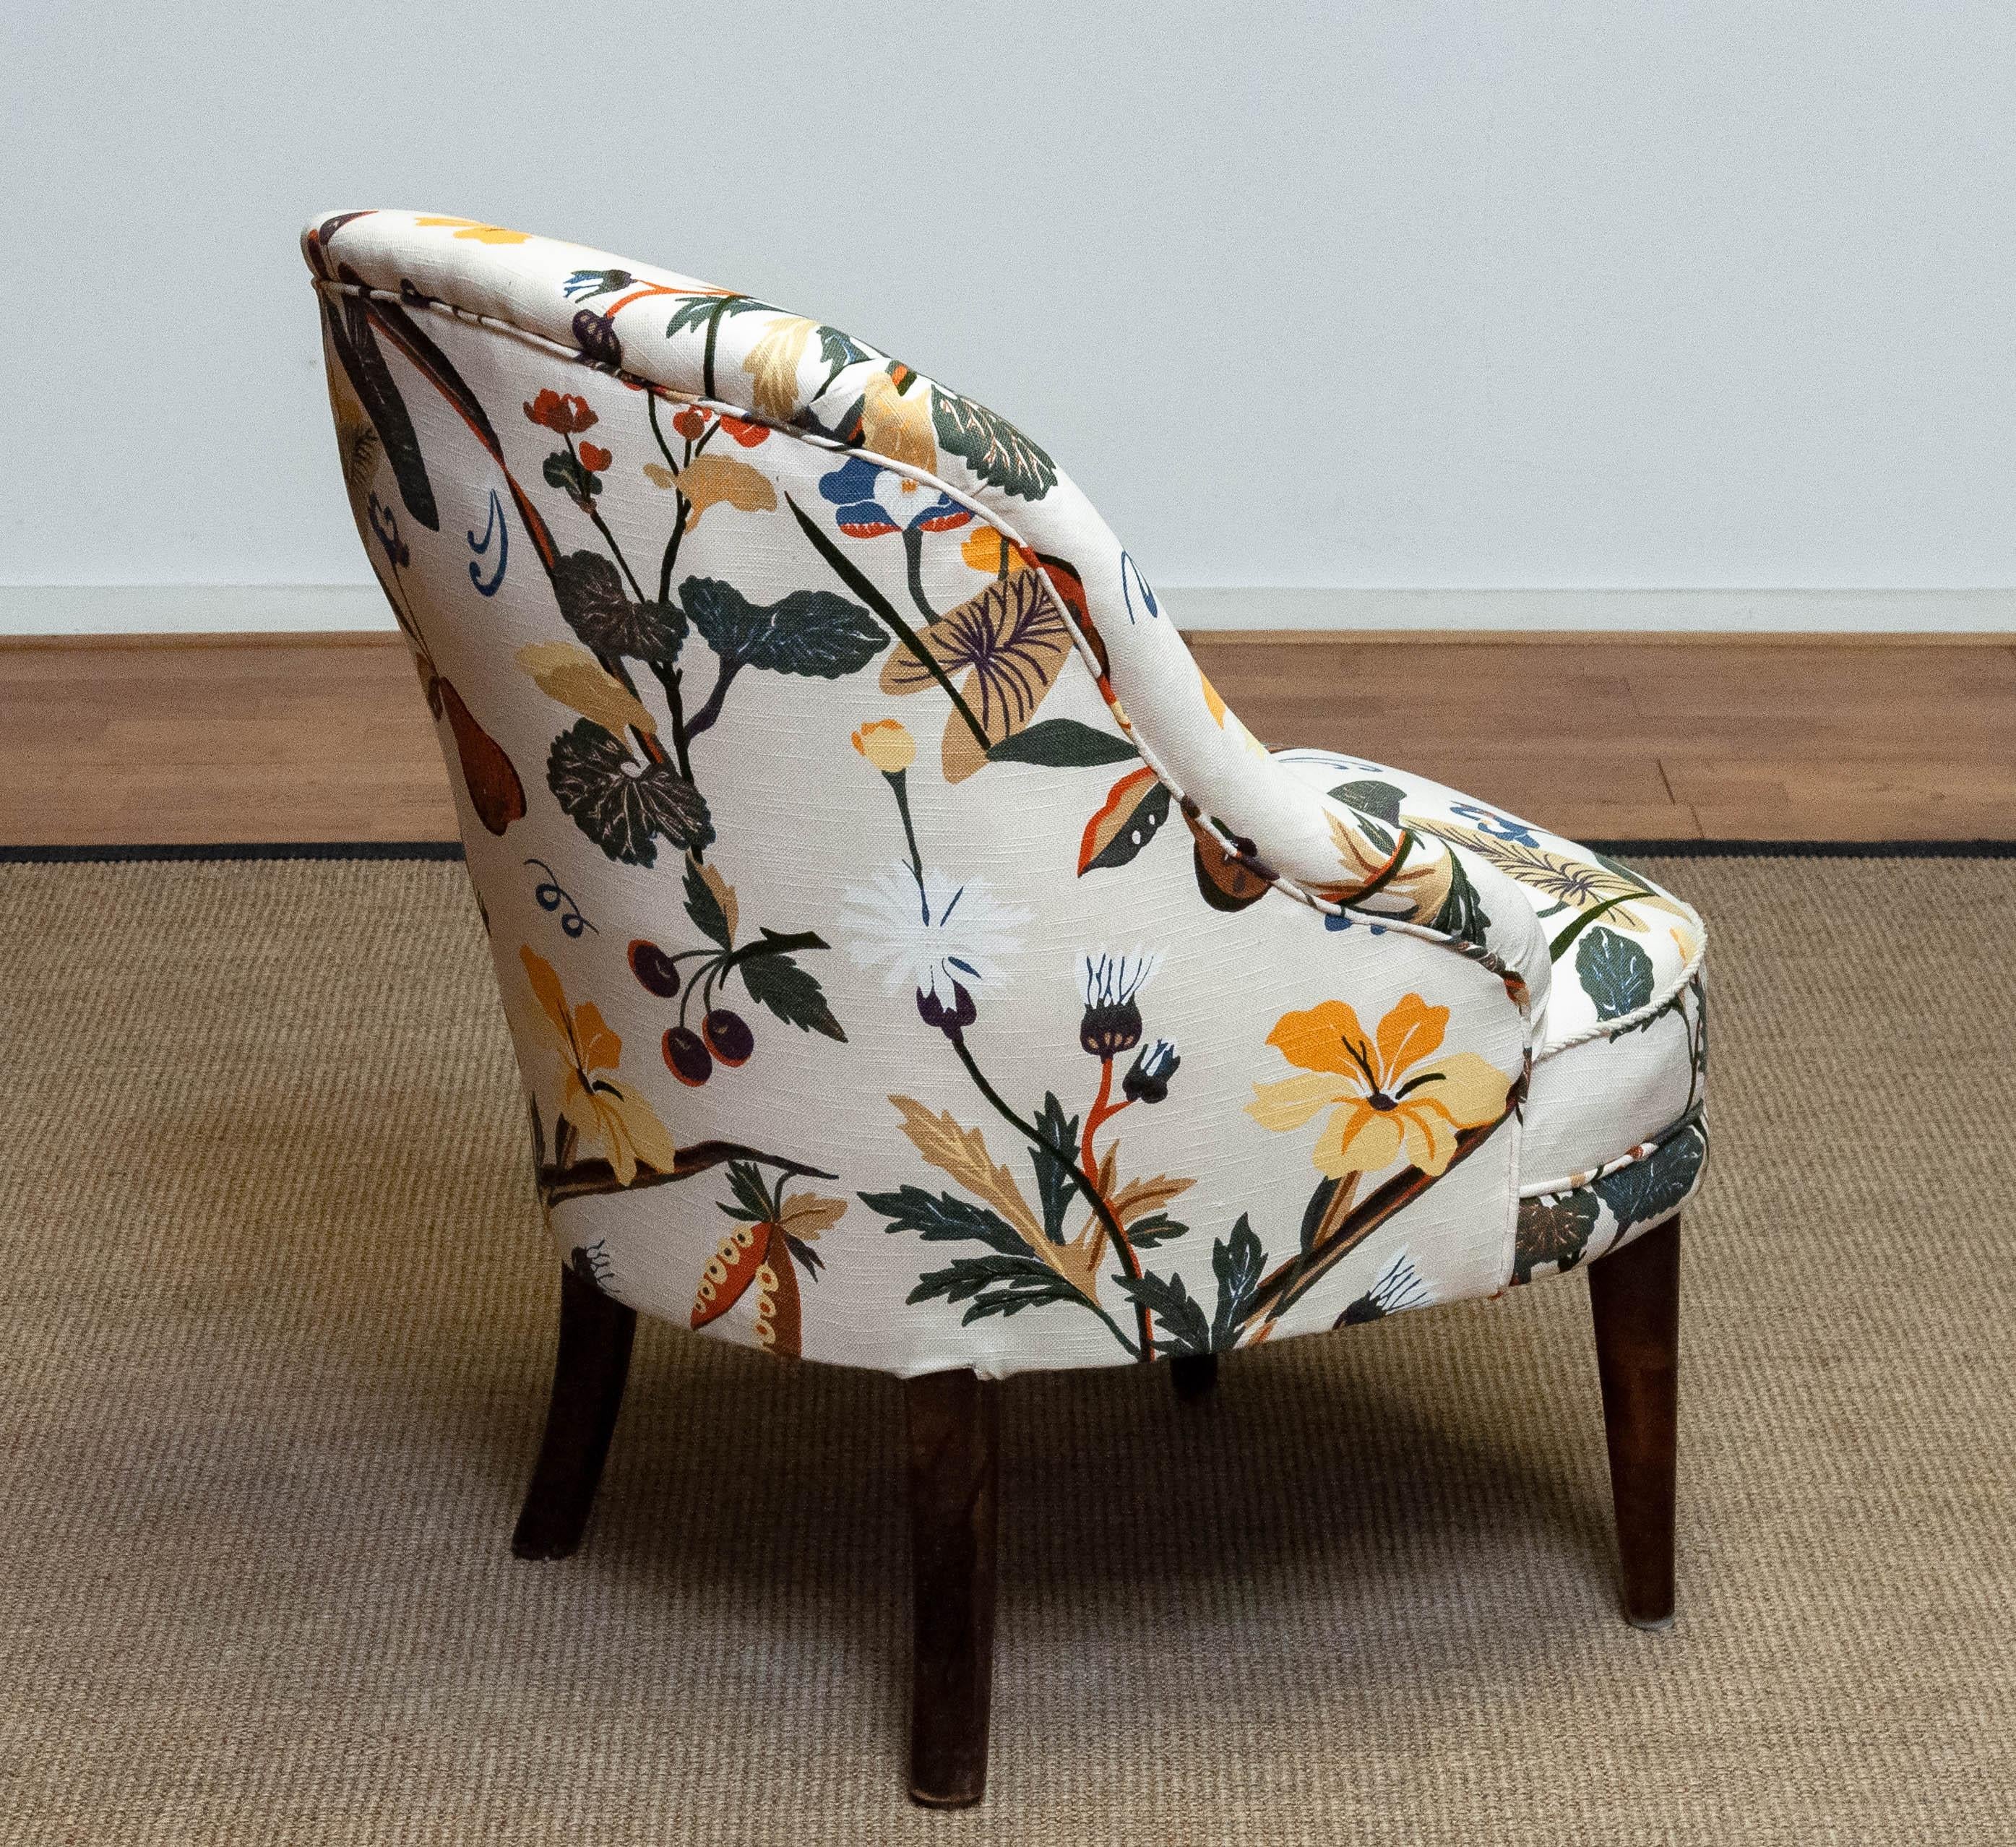 Mid-20th Century 1940s Floral Printed Linen, J. Frank Style, New Upholstered Danish Slipper Chair For Sale